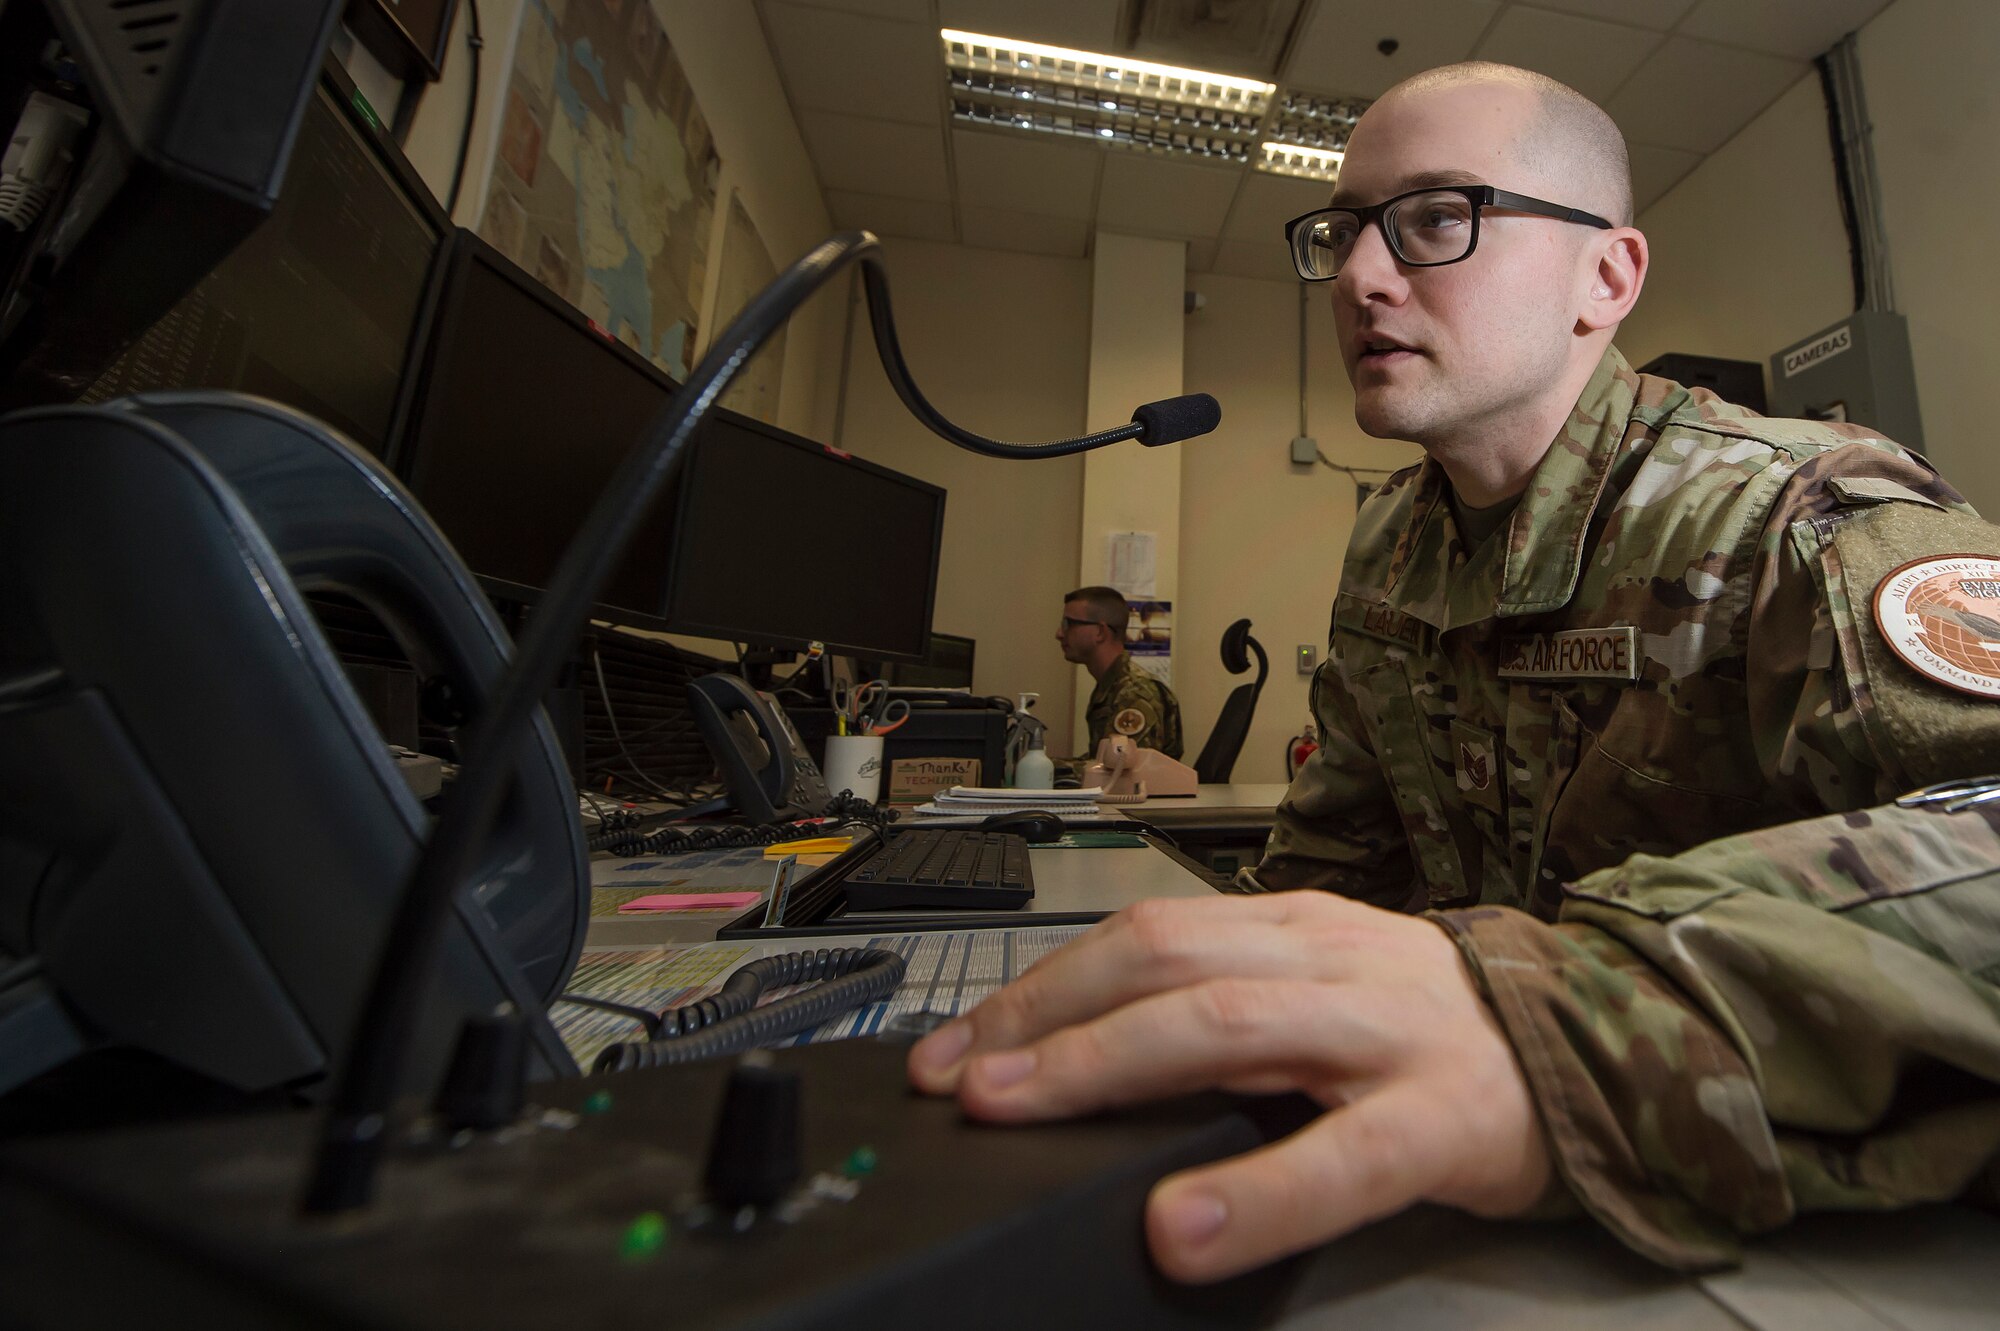 Tech. Sgt. Edward Lauer, 379th Air Expeditionary Wing Command Post NCO in charge of command and control operations, performs a radio check with agencies across the installation March 22, 2019, at Al Udeid Air Base, Qatar. Airmen from the command post are responsible for gathering and relaying information to entities across base to include aircraft maintenance requirements, security forces incidents, and notifications that ensure the safety of Airmen and other assets on base. (U.S. Air Force photo by Tech. Sgt. Christopher Hubenthal)